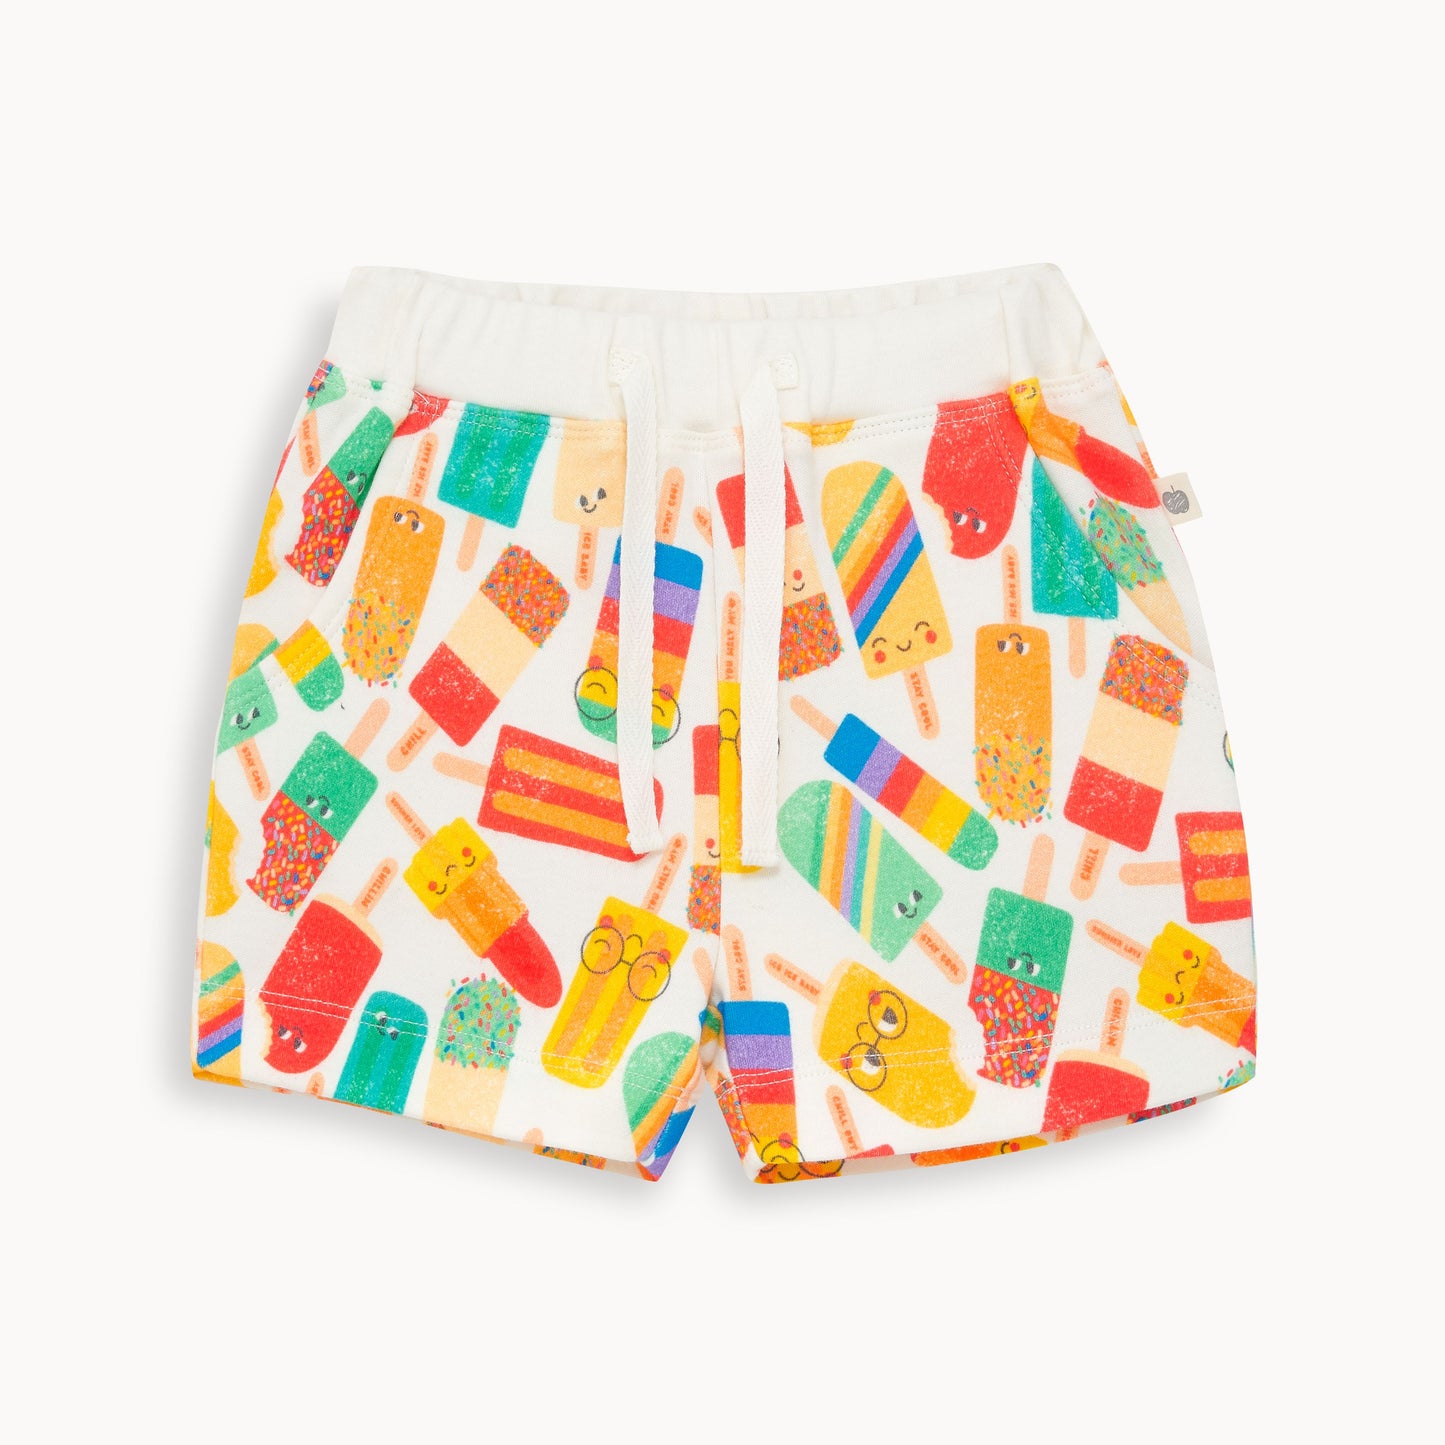 Southsea Lolly Shorts